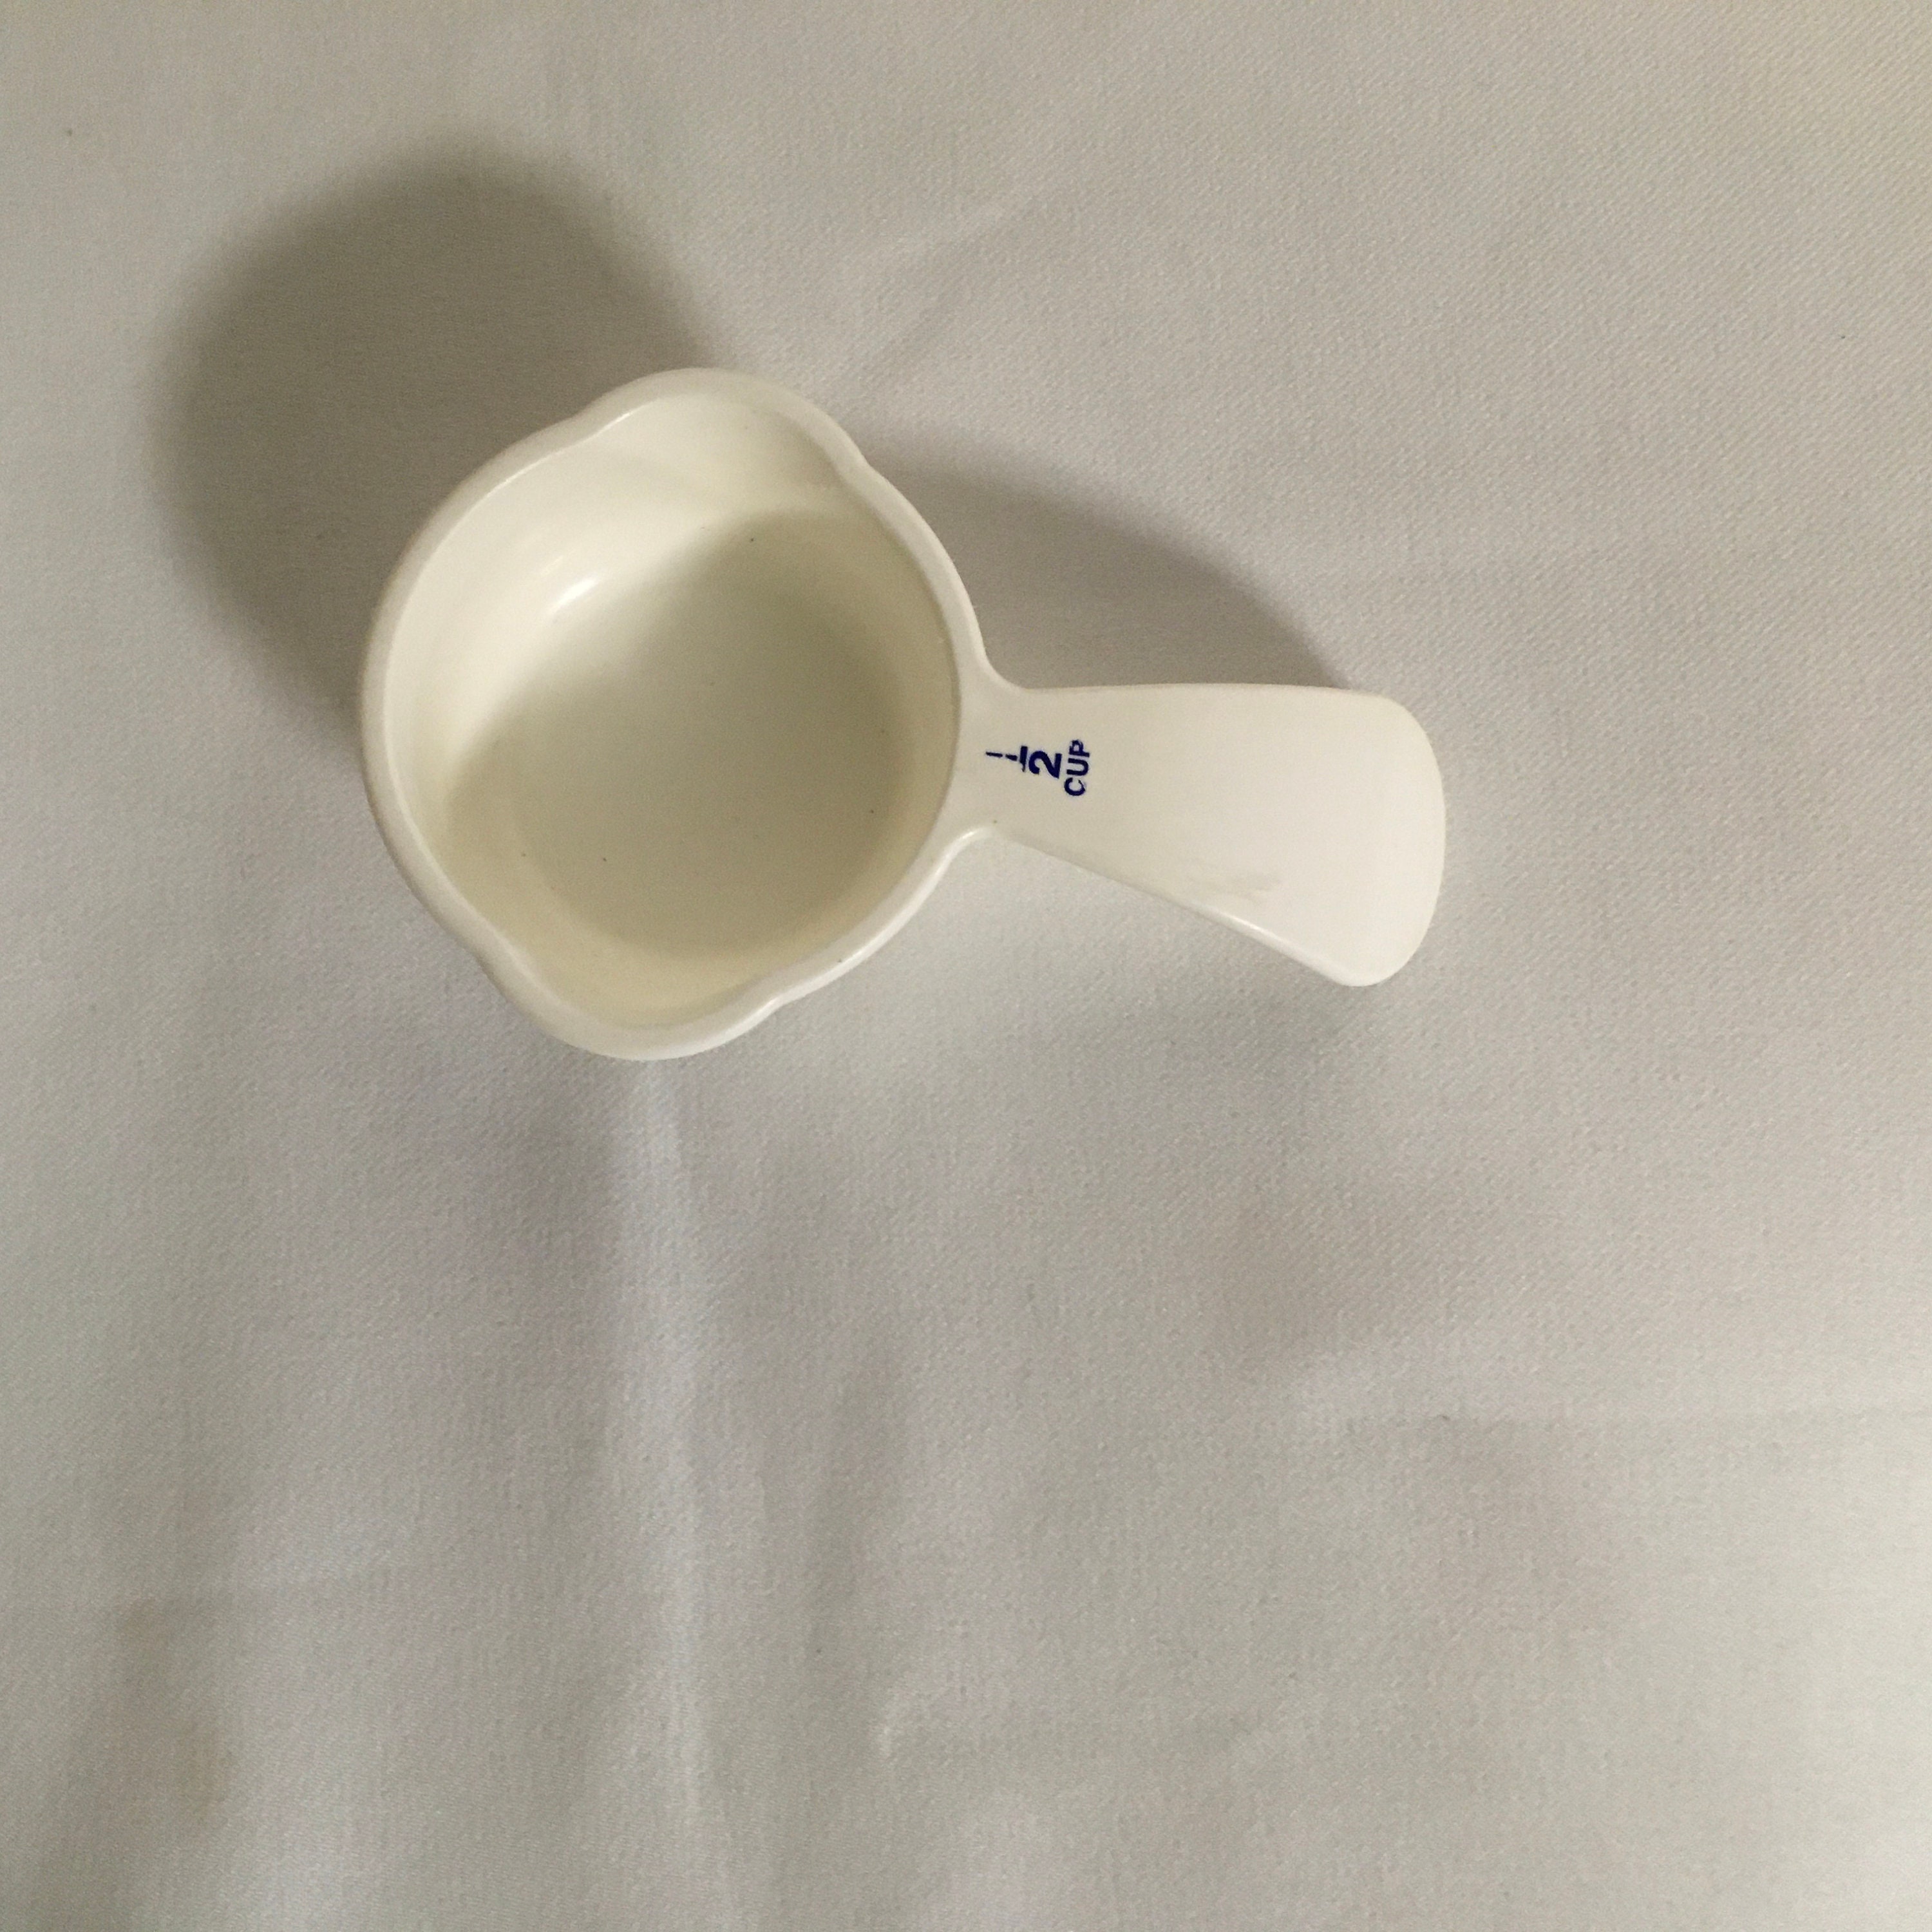 Smart Savers 1 Cup White Plastic Measuring Cup - Old Monroe Lumber Co. Inc.